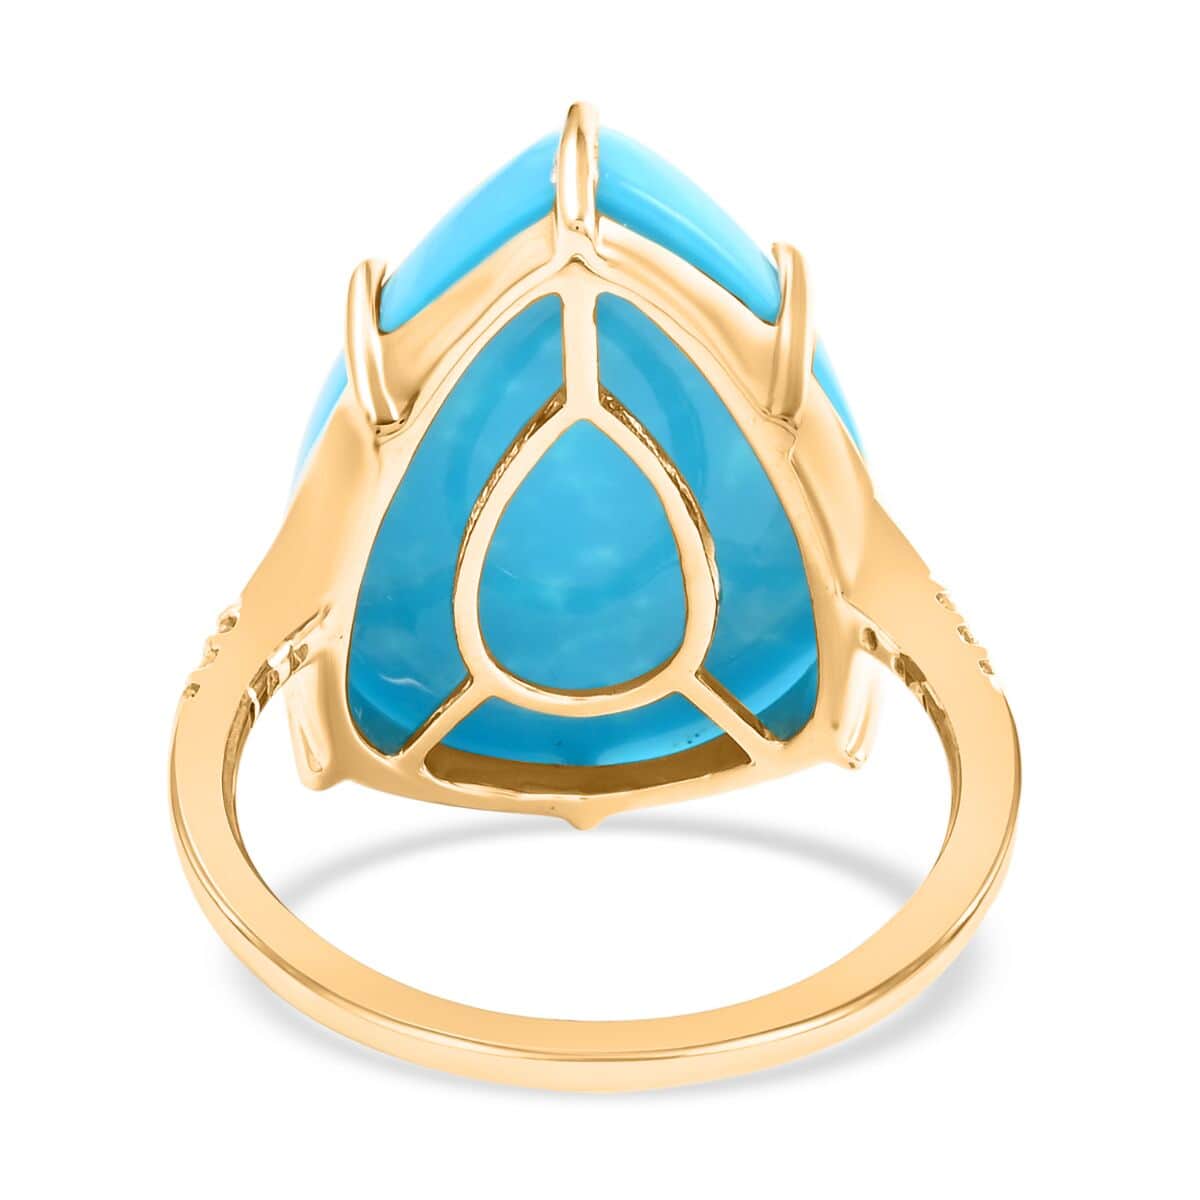 Certified & Appraised Luxoro 10K Yellow Gold AAA Sleeping Beauty Turquoise and I2 Diamond Ring 12.65 ctw (Del. in 7-10 Days) image number 4